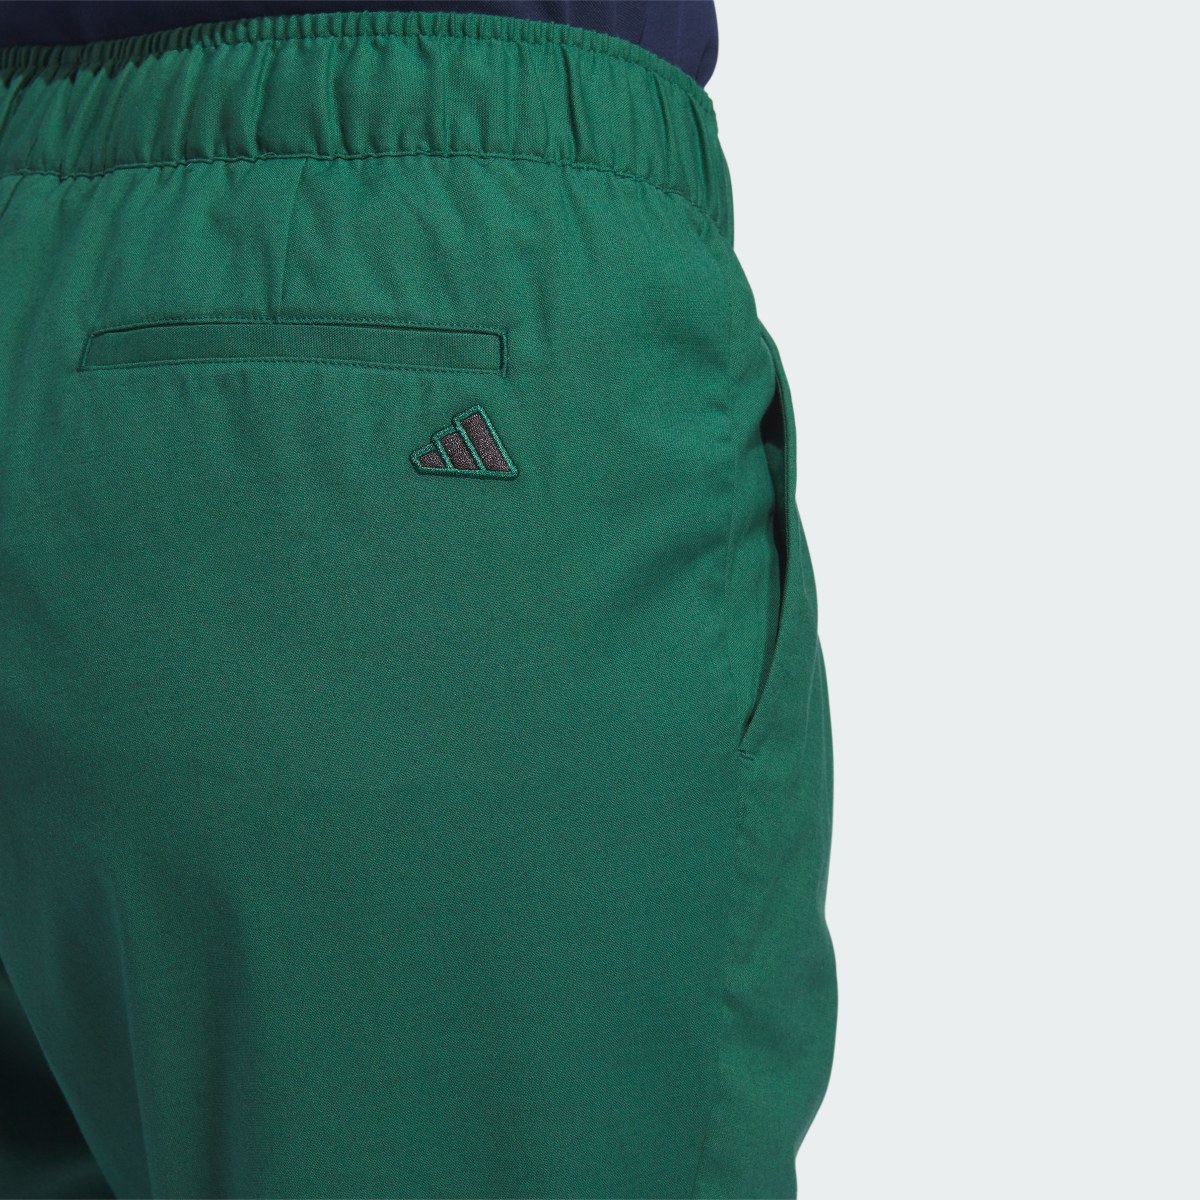 Adidas Go-To Joggers. 7